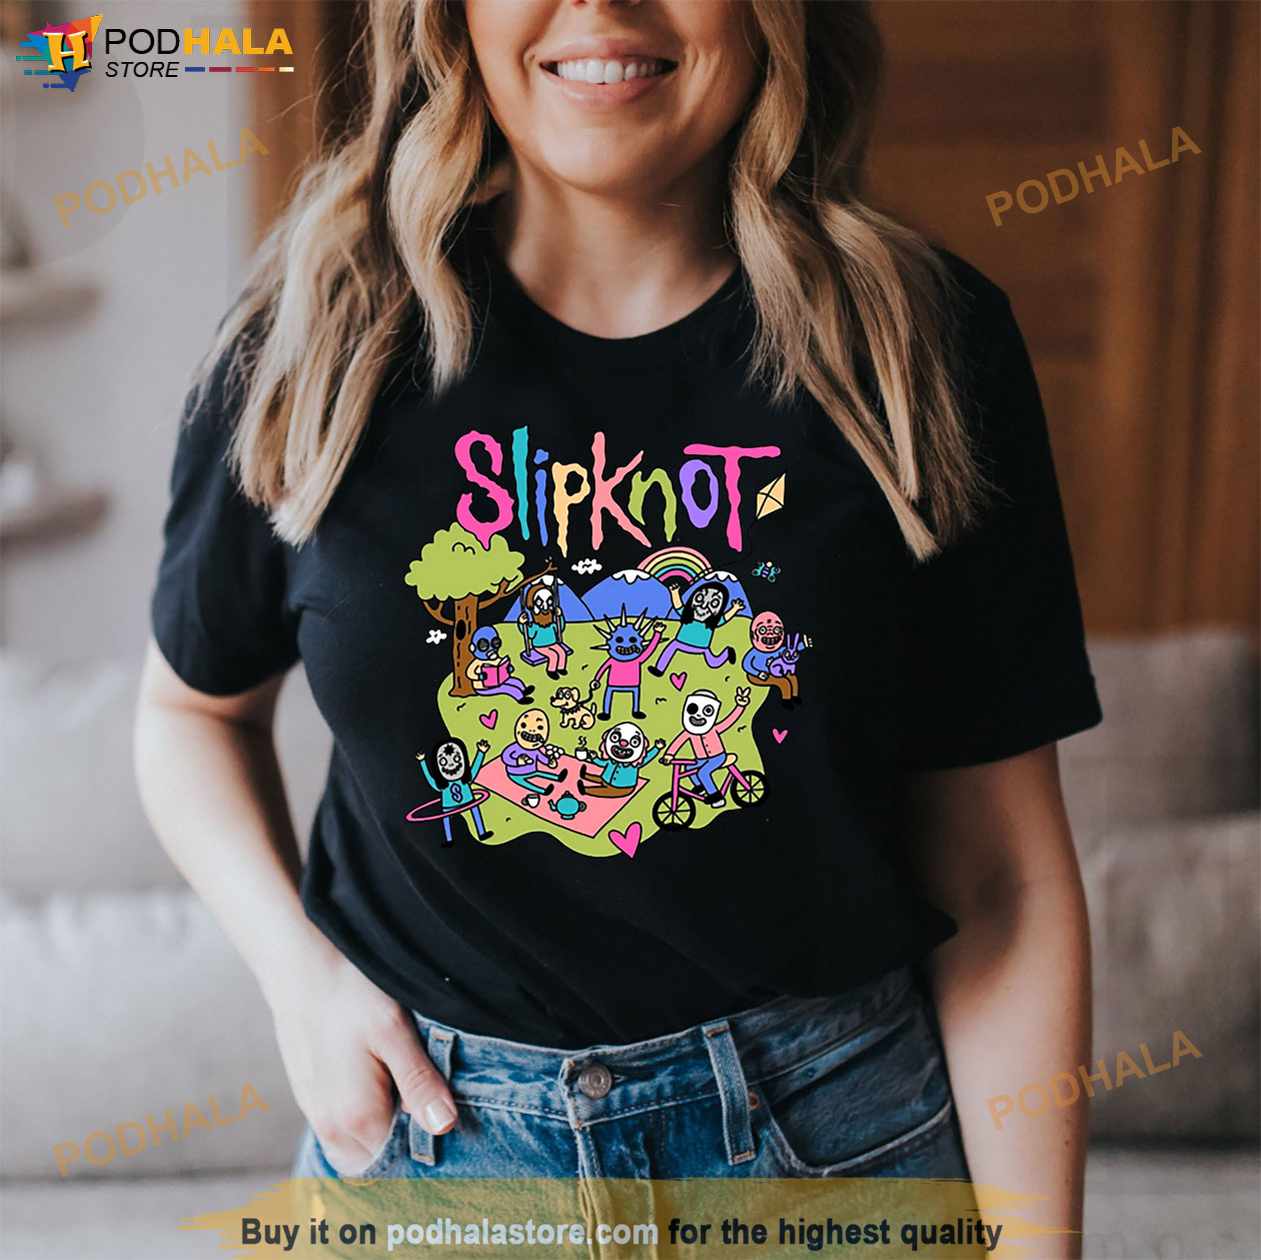 Slipknot Bootleg cartoon shirt - Bring Your Ideas, Thoughts And